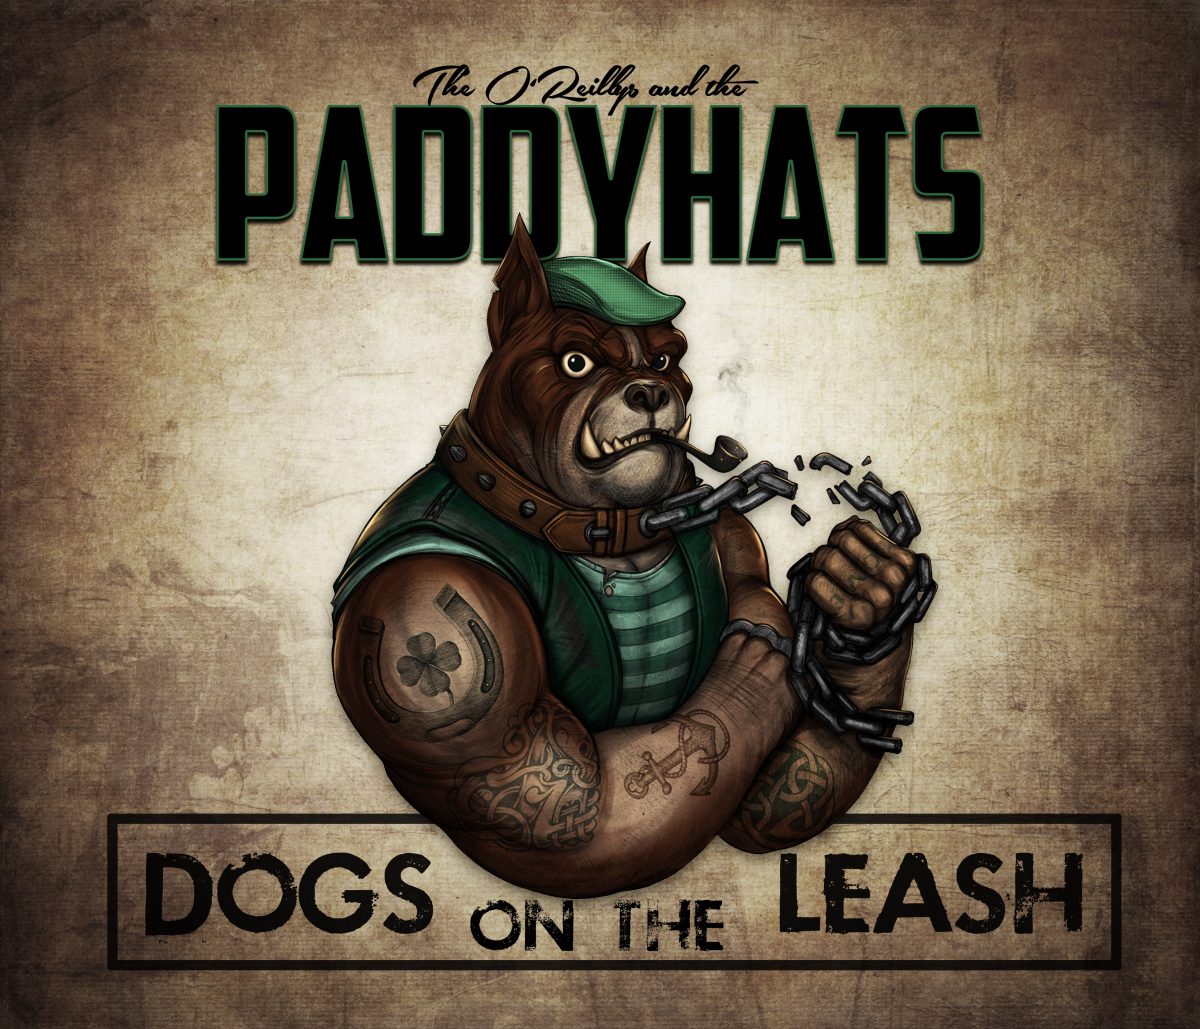 The O'Reillys and the Paddyhats - Dogs on the Leash (Cover)